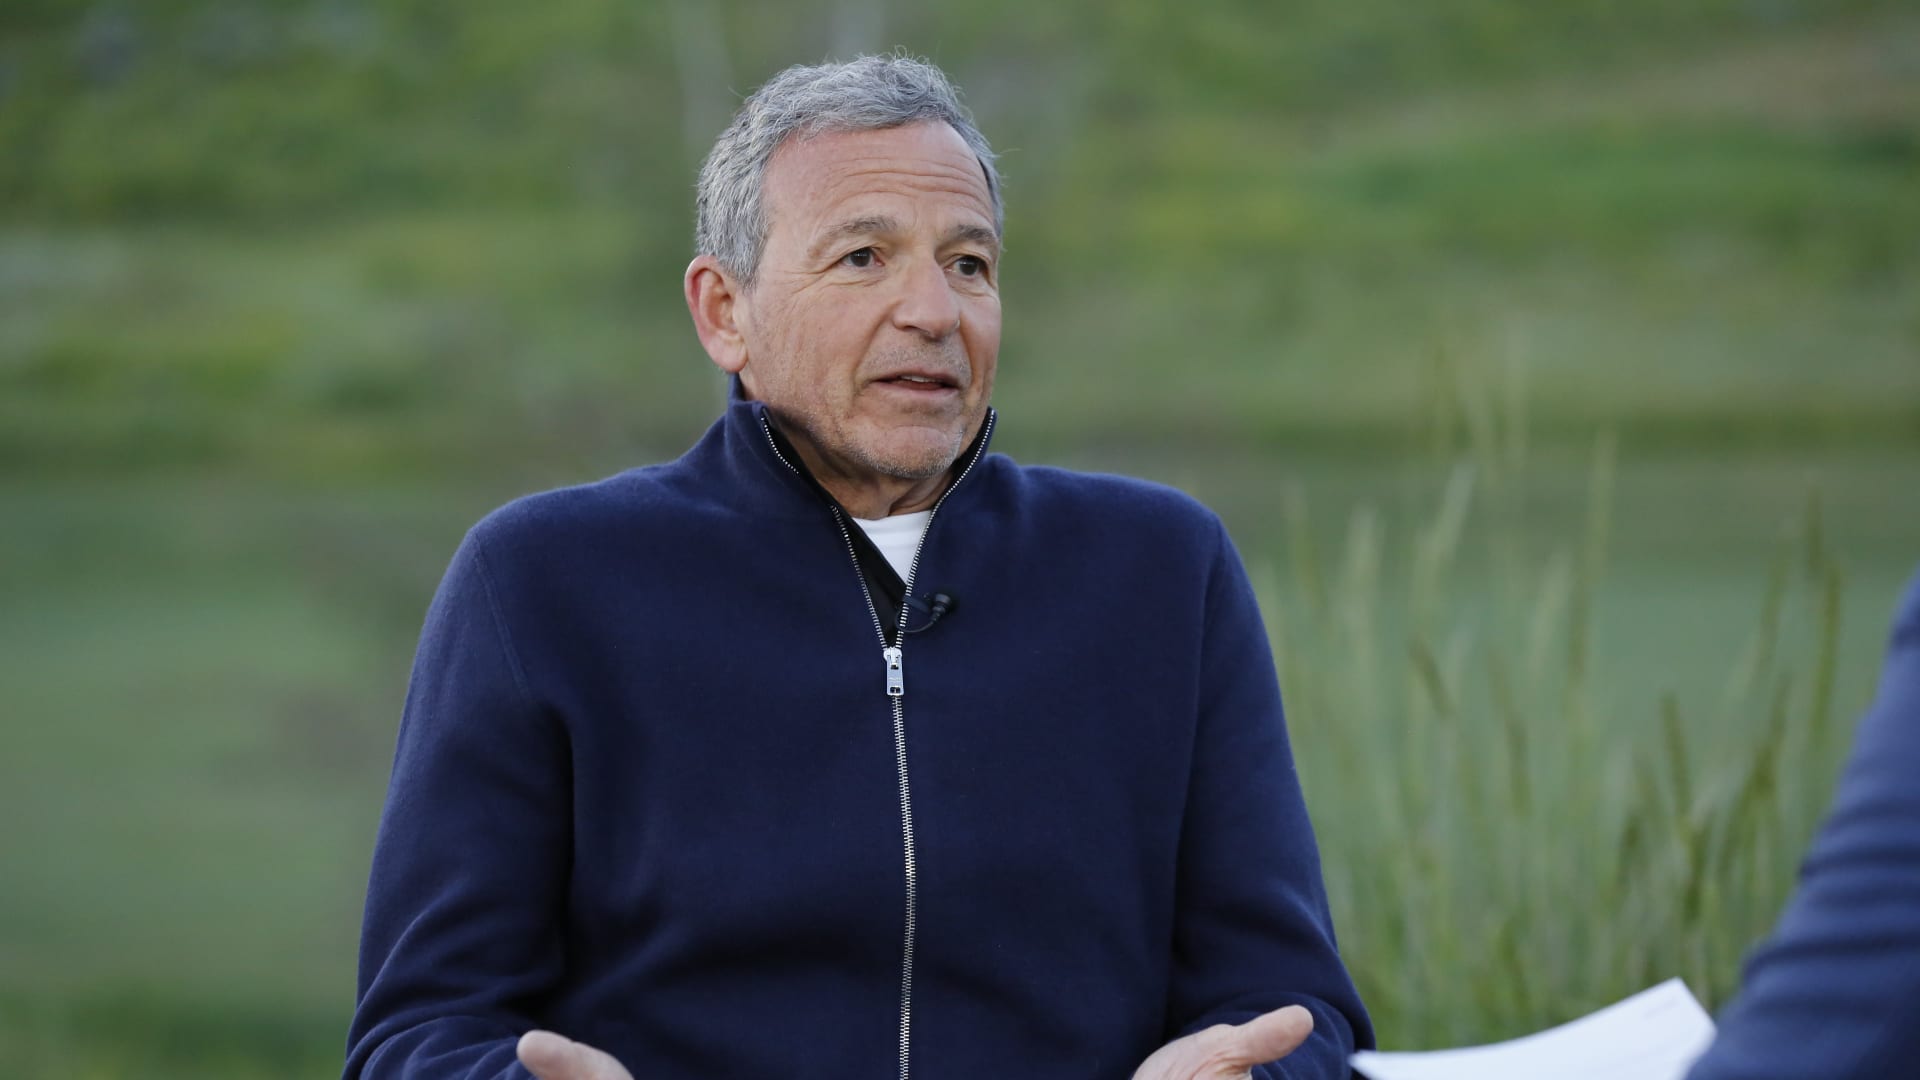 Disney CEO Bob Iger tells employees he wants to start building again during town hall